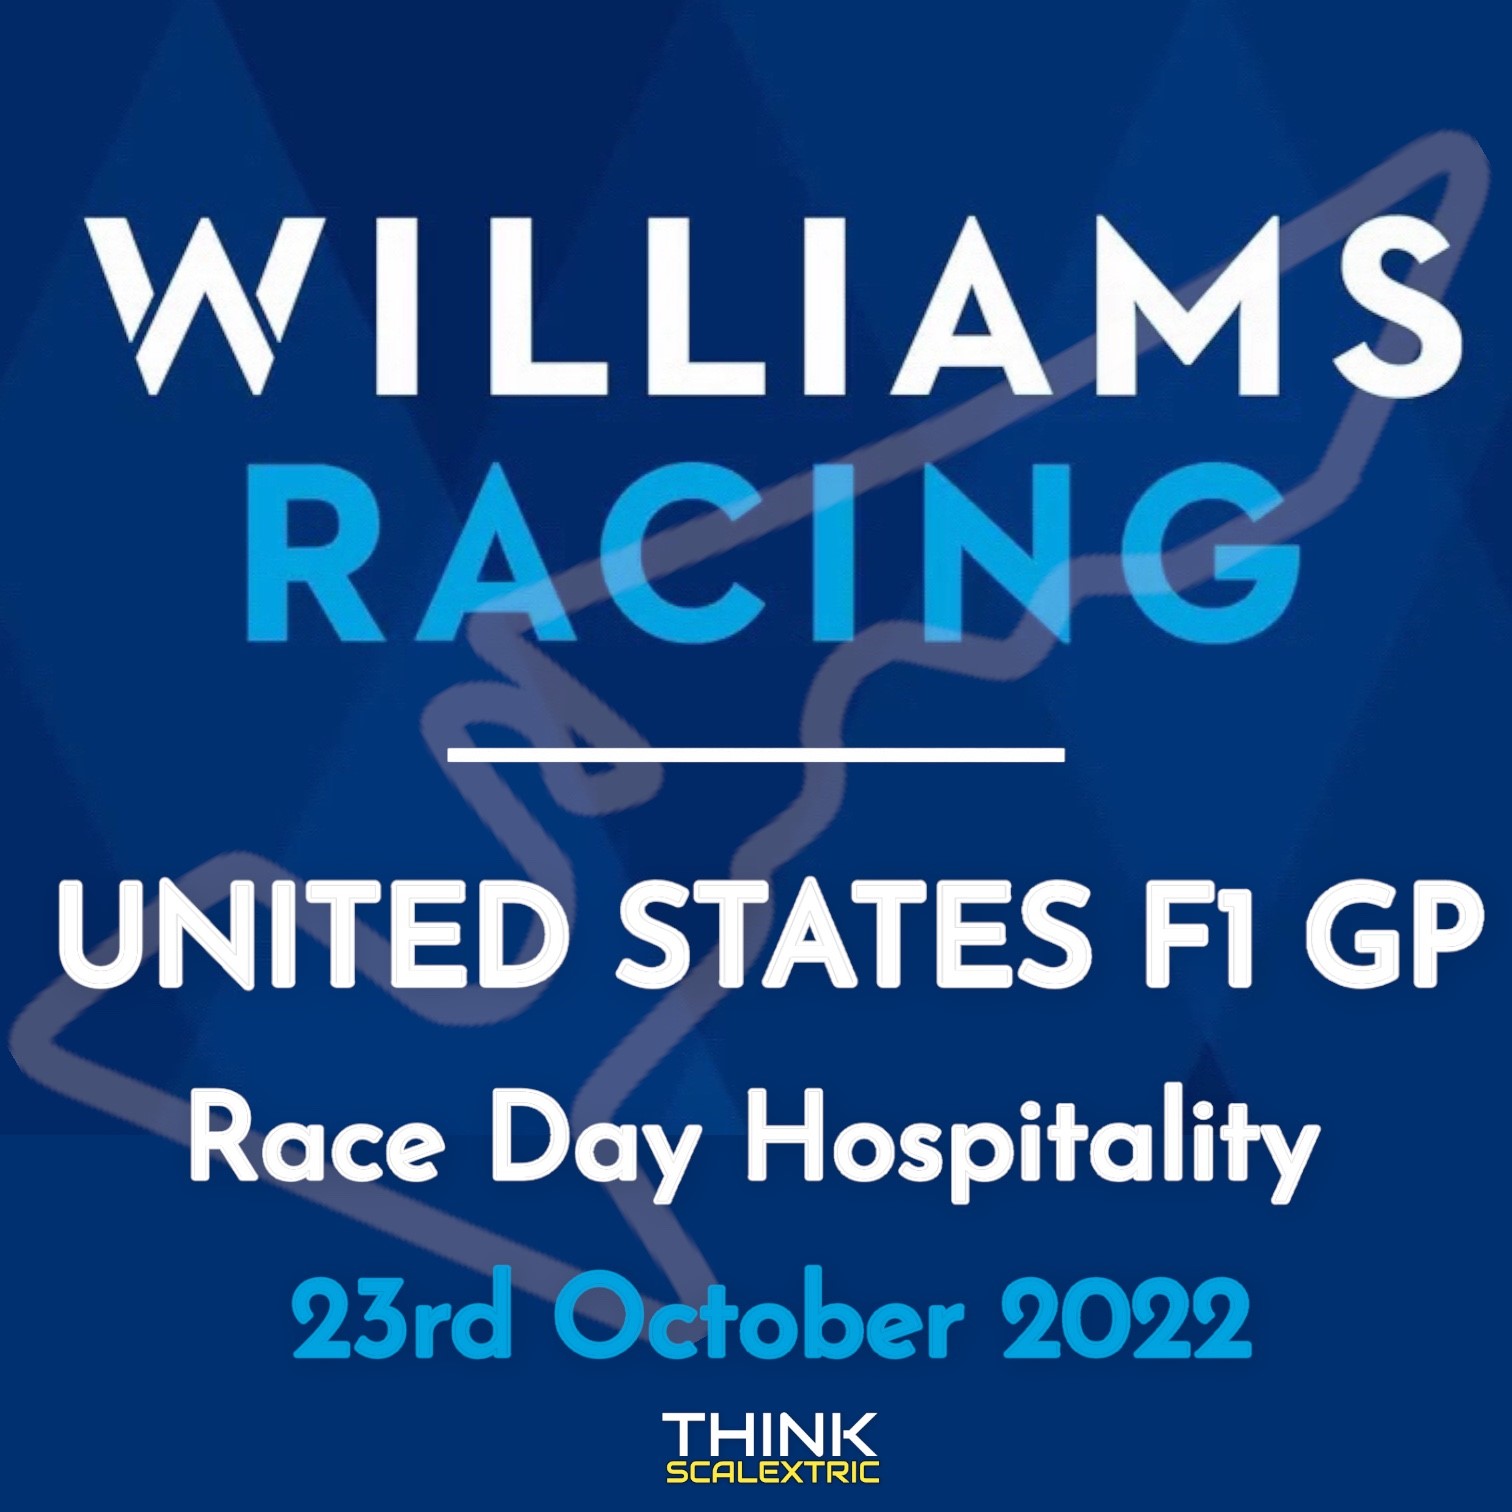 williams racing race day hospitality united states f1 gp 2022 giant scalextric bespoke track build